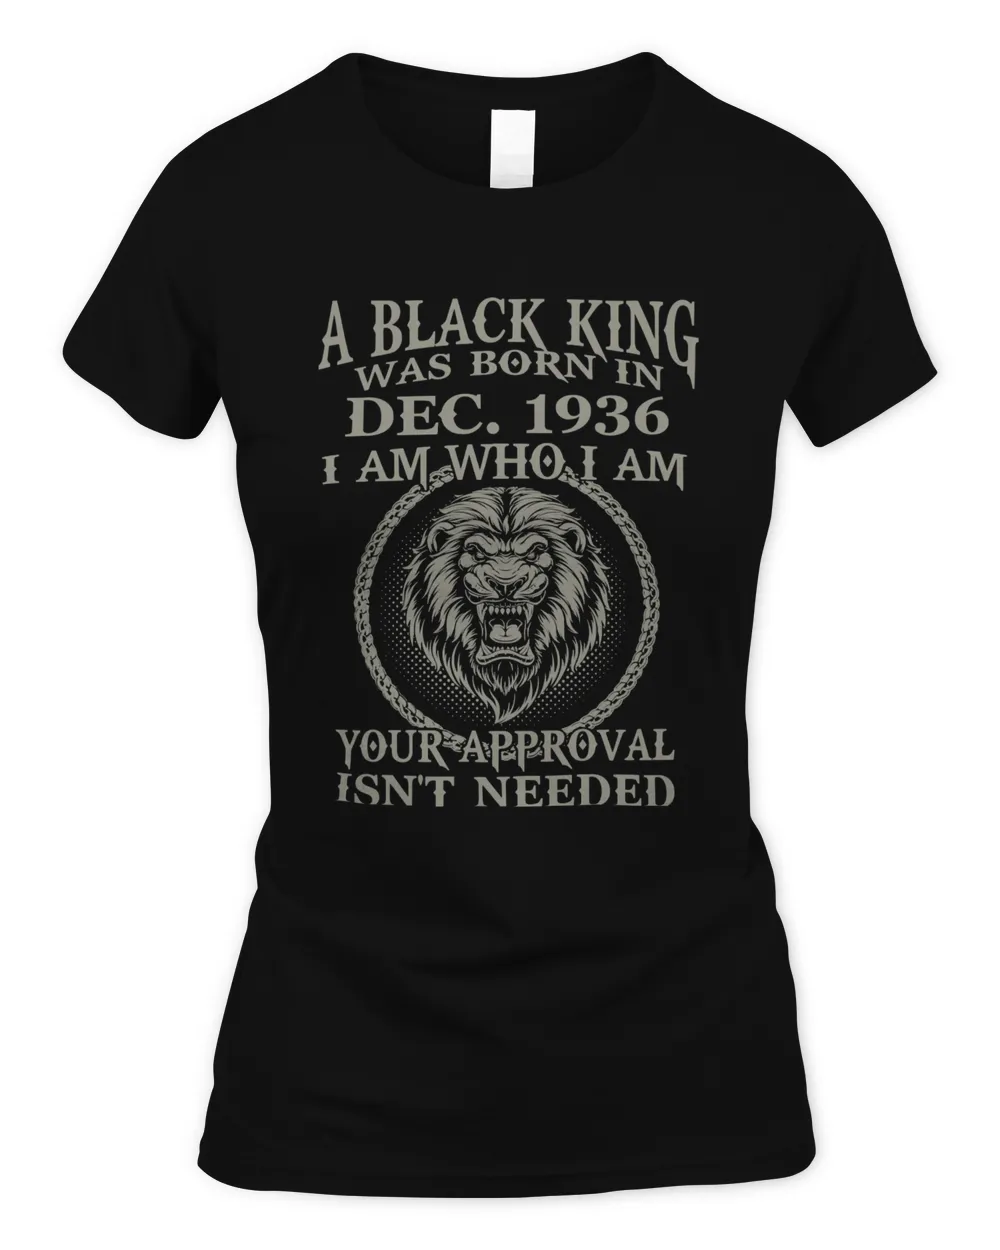 Black King Are Born In DECEMBER 1936. Black King Was Born In DECEMBER 1936 Classic T-Shirt